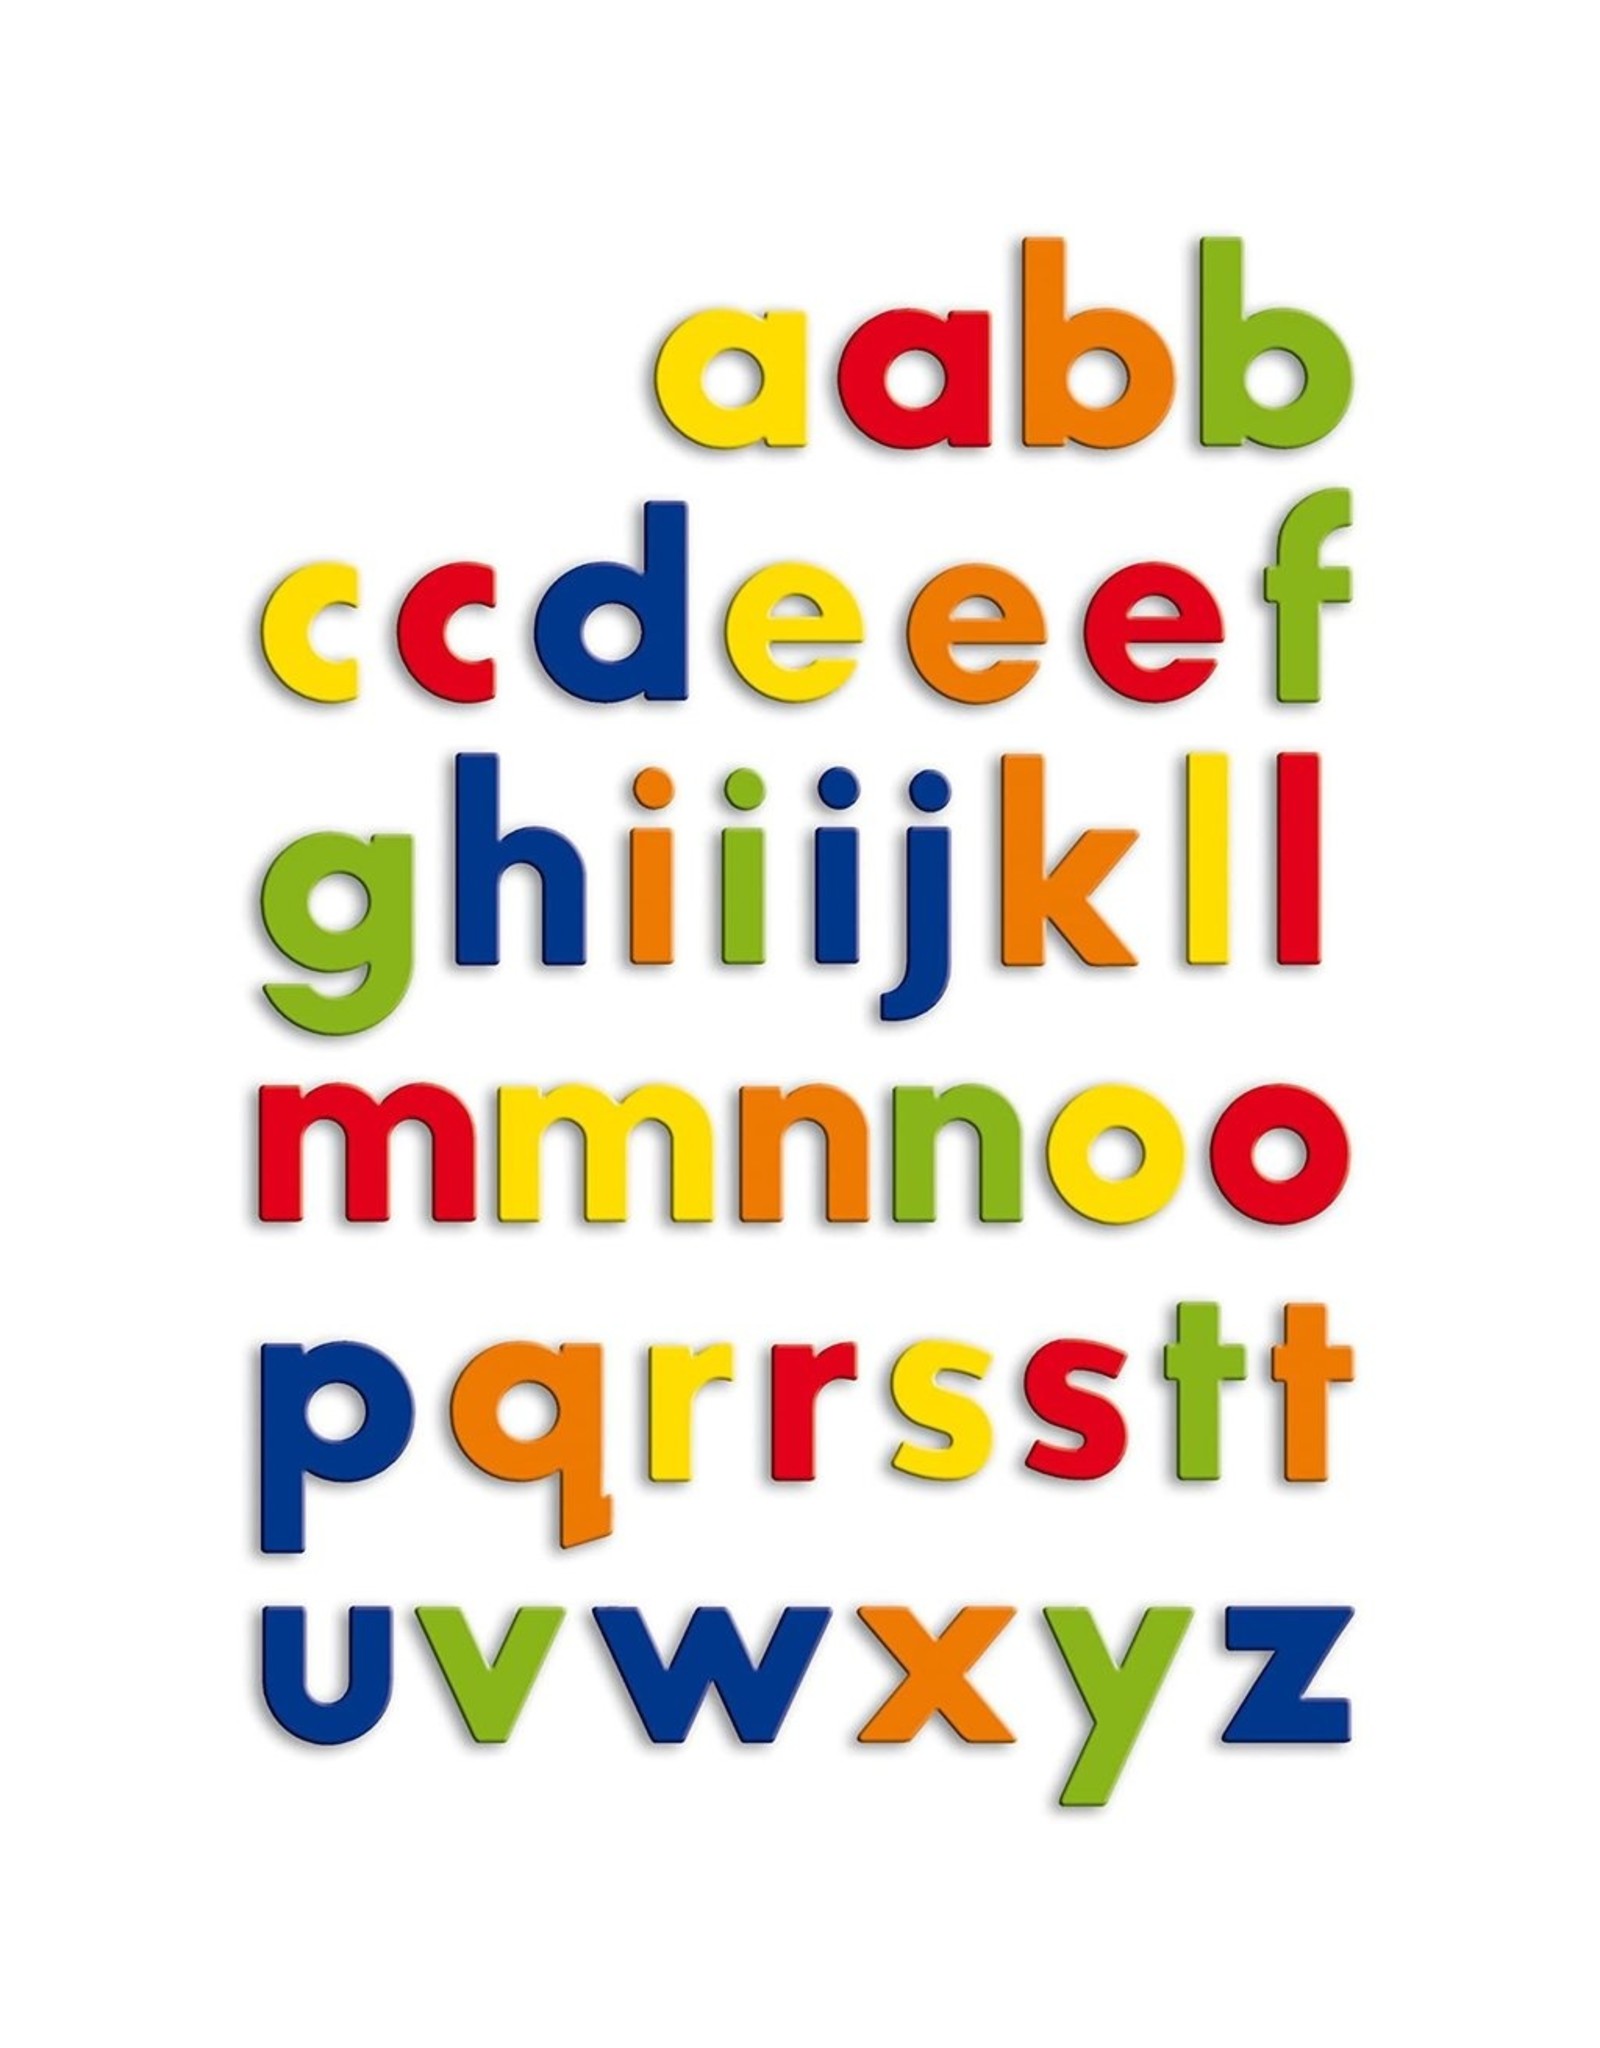 Magnetic Letters - Lowercase